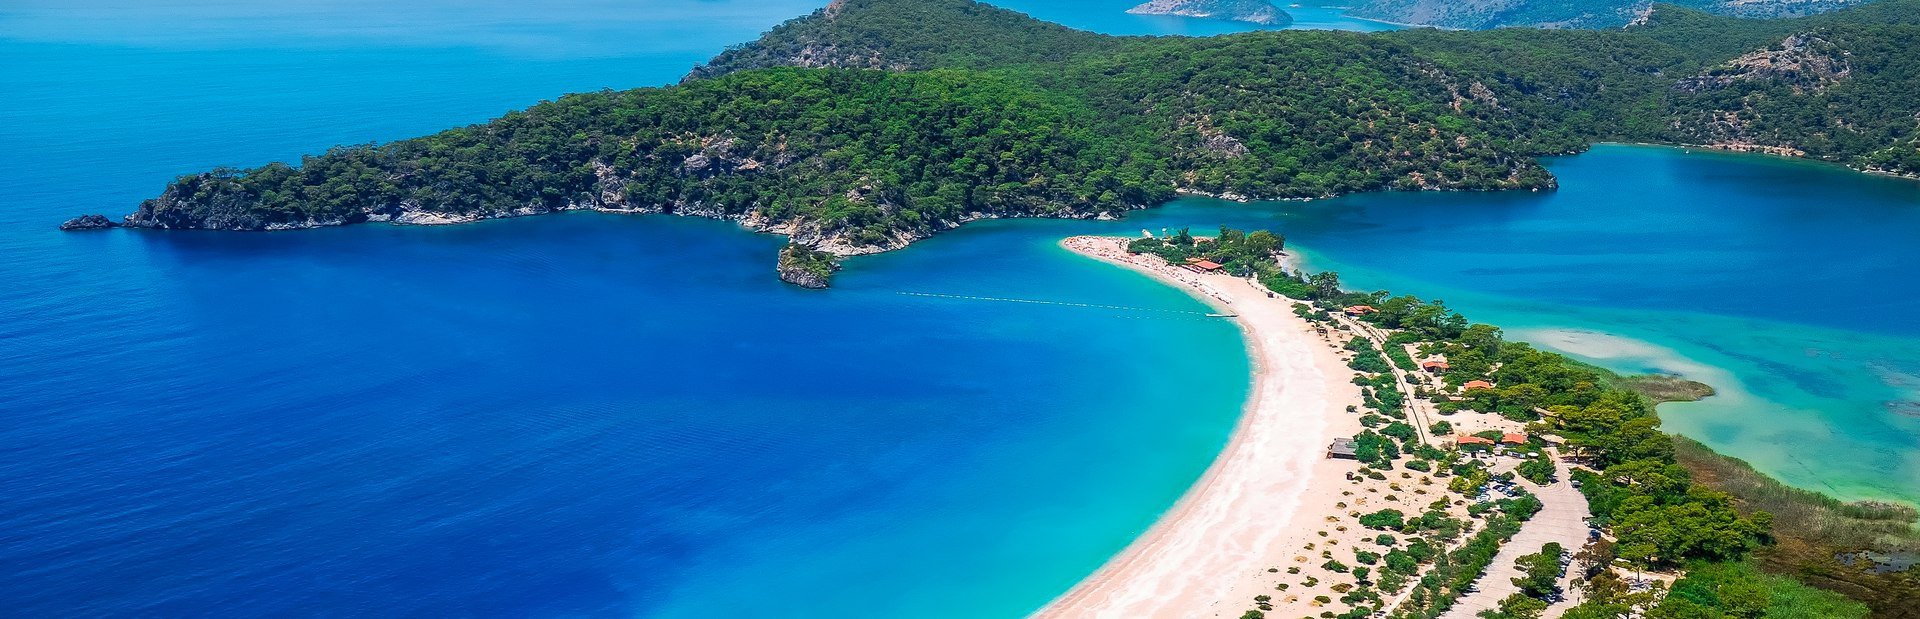 One of the best beaches in Turkey